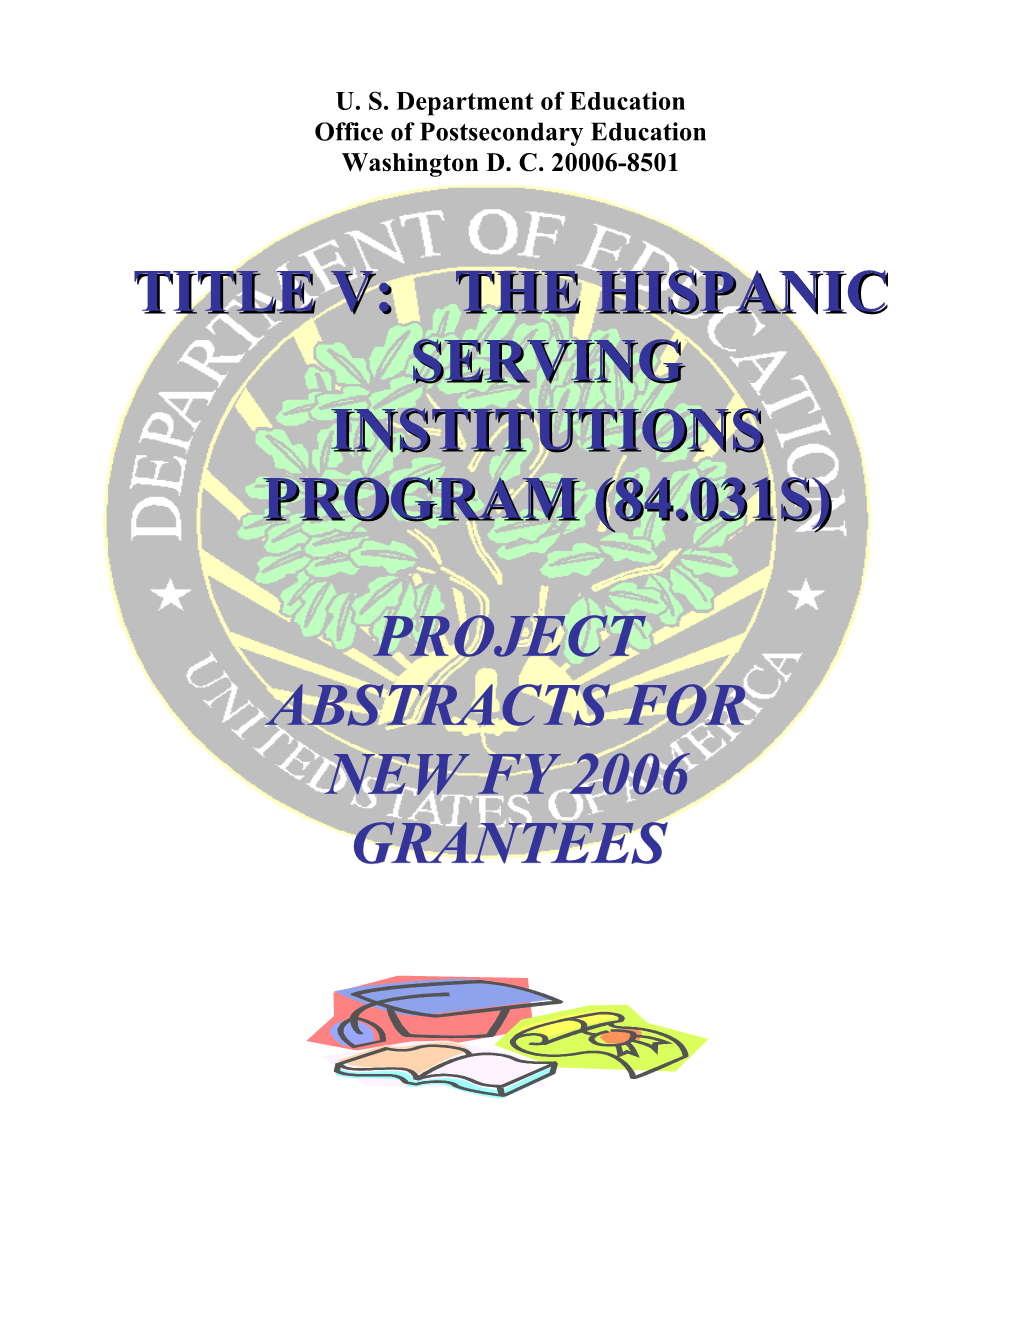 FY 2006 Project Abstracts for the Title V Hispanic-Serving Institutions Program (MS Word)